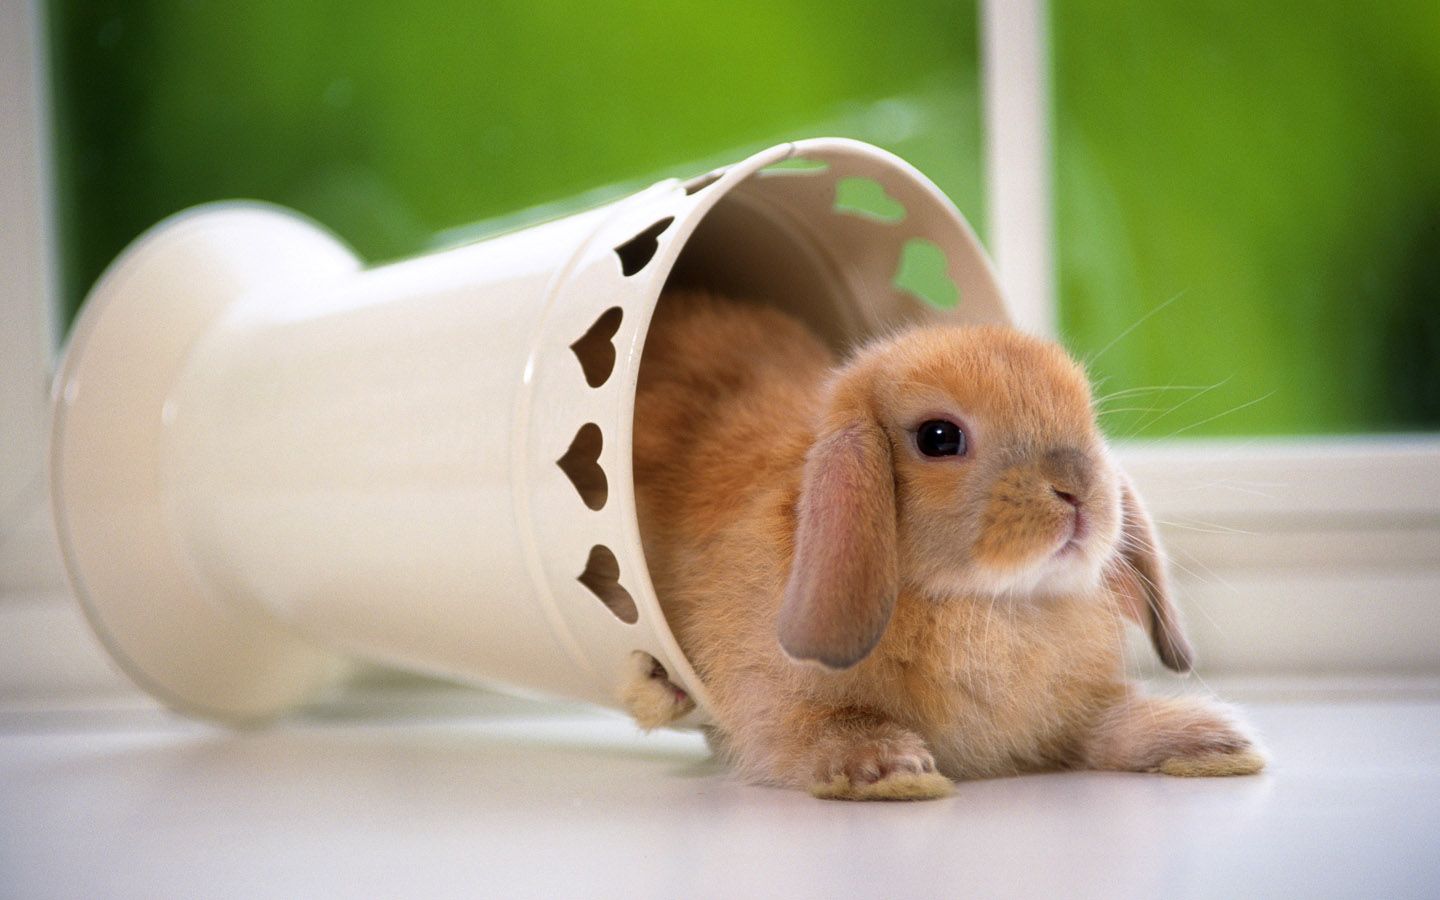 cute rabbit wallpaper you would definitely love wallpaper that could